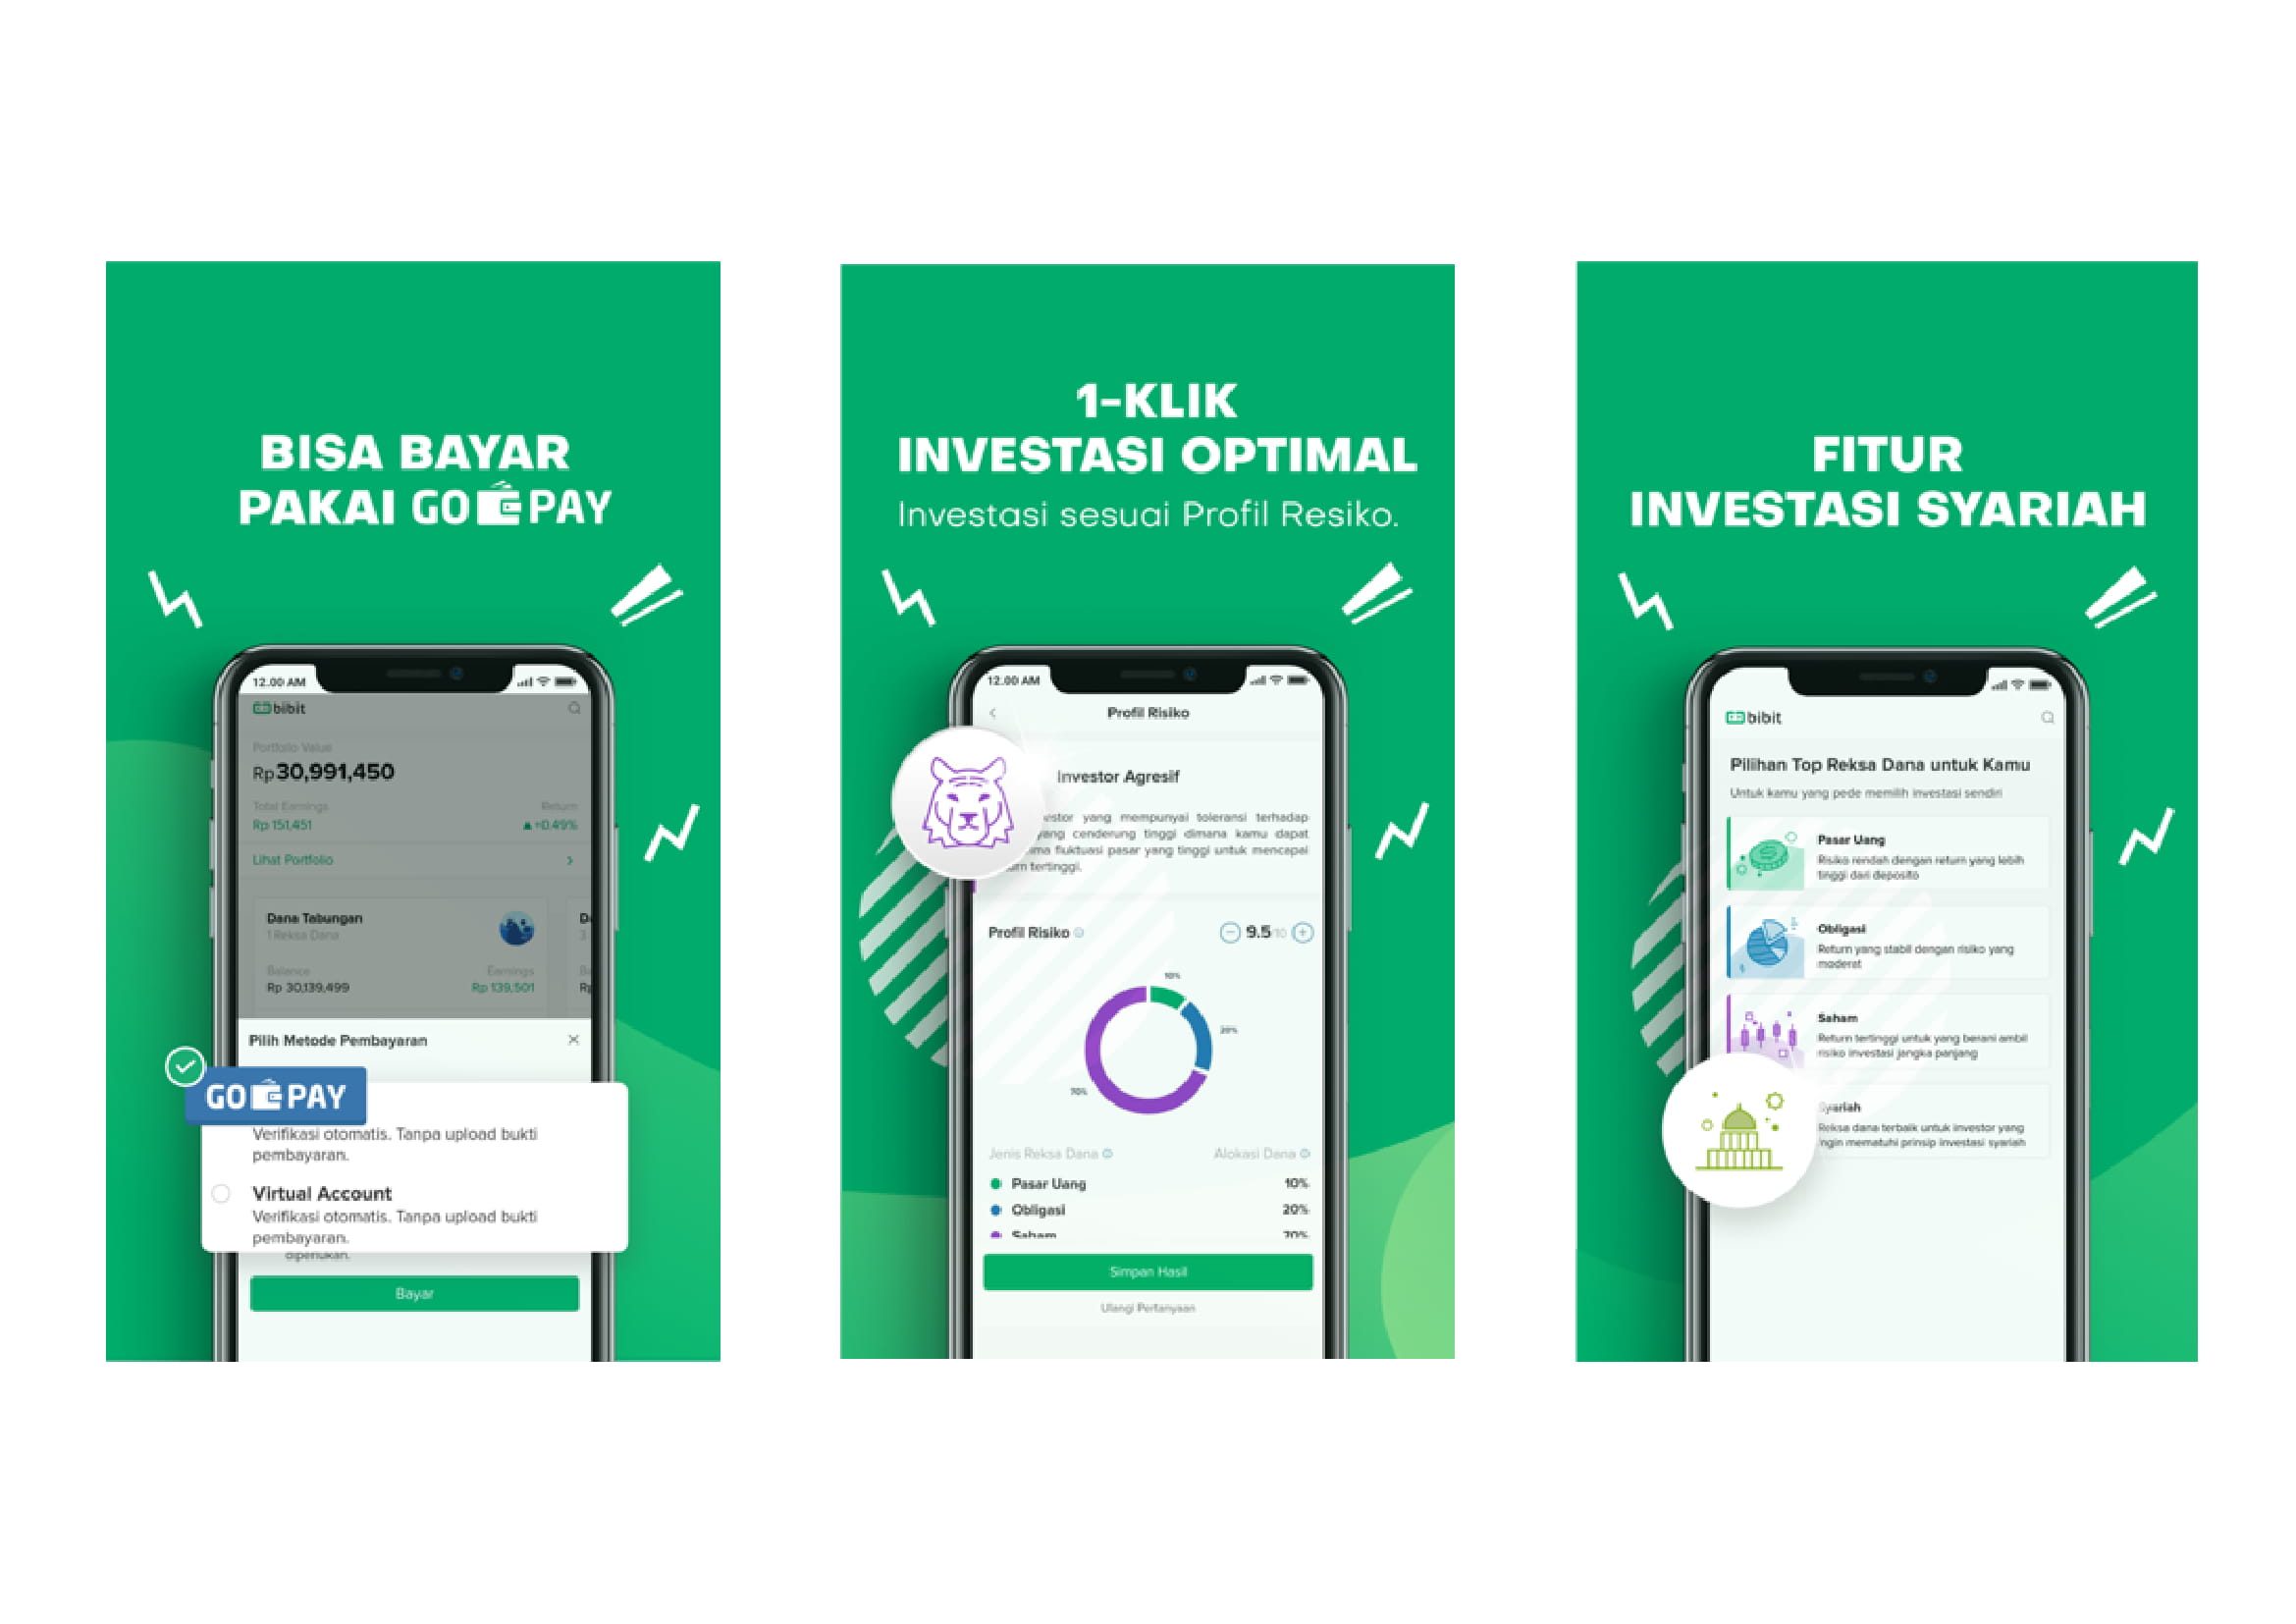 Indonesian stock trading platform Stockbit bags Series A funding led by East Ventures